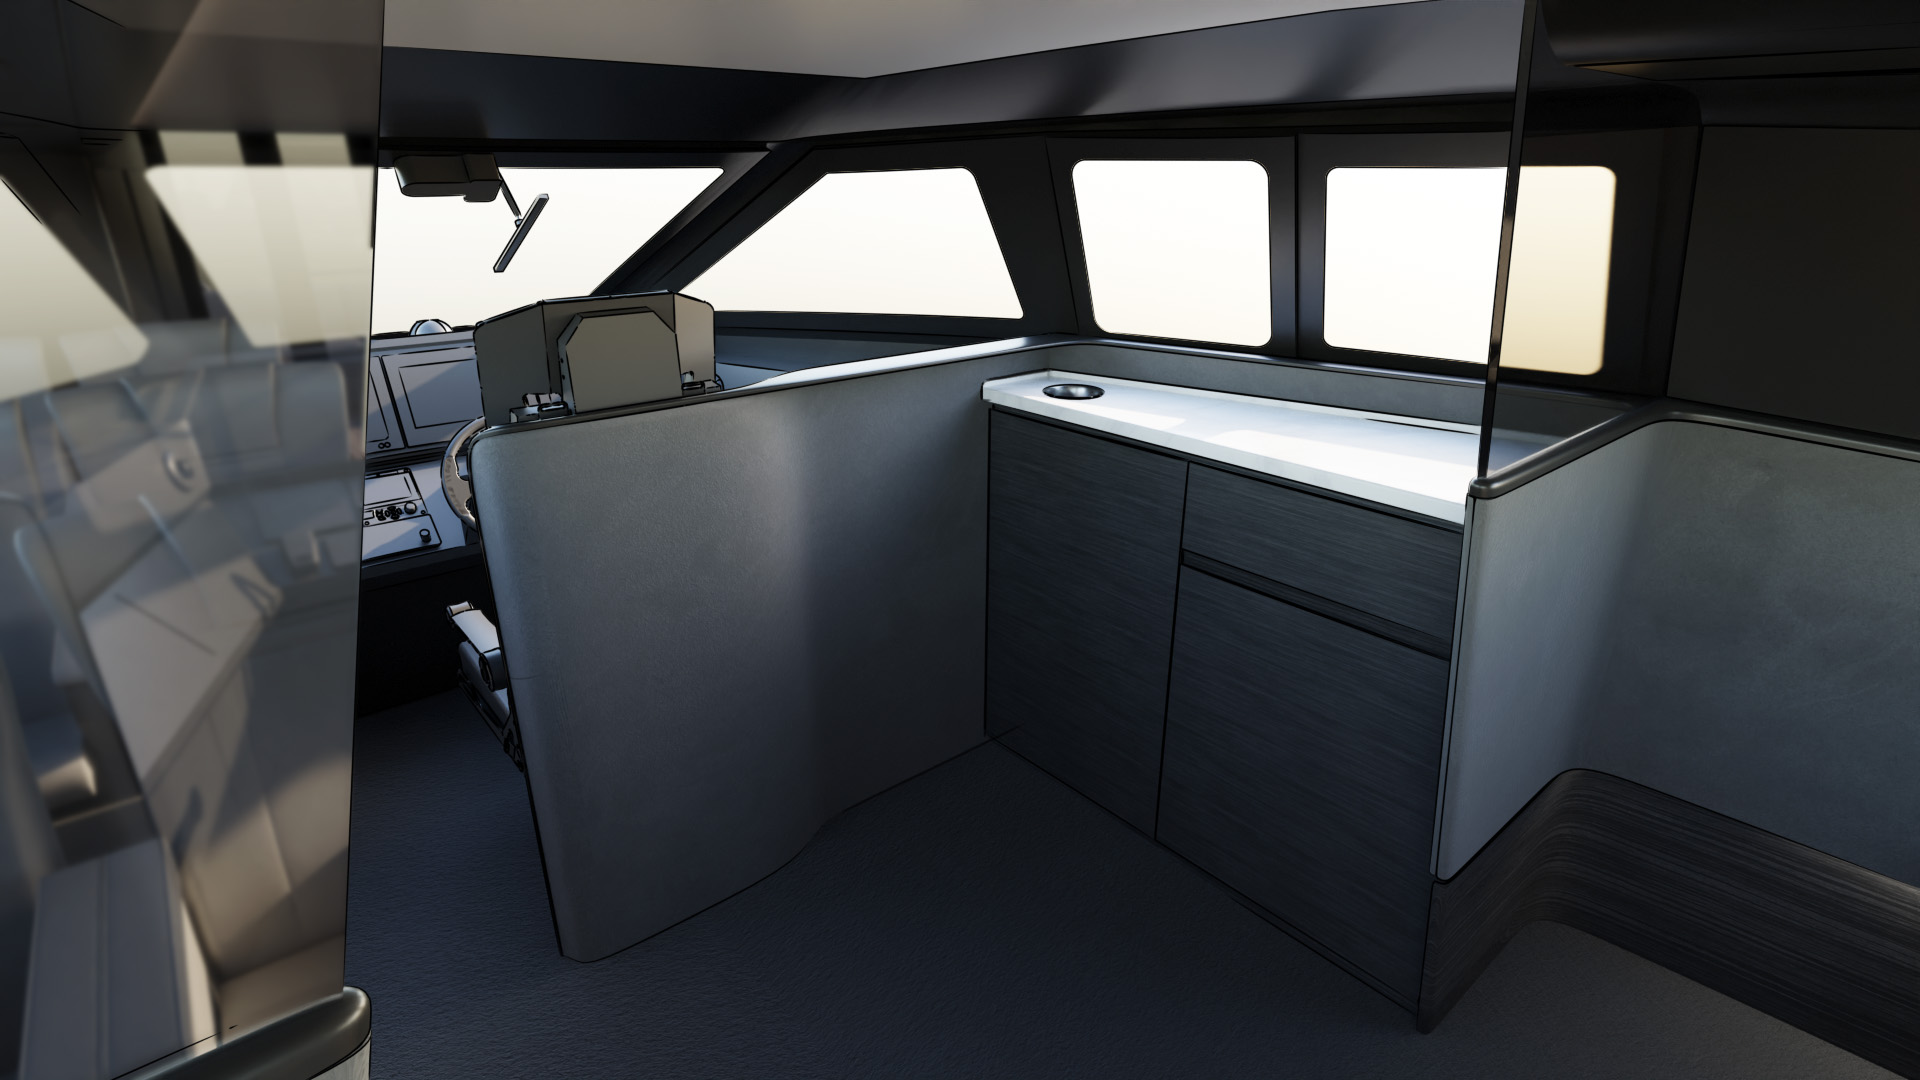 Galley of a luxury water taxi